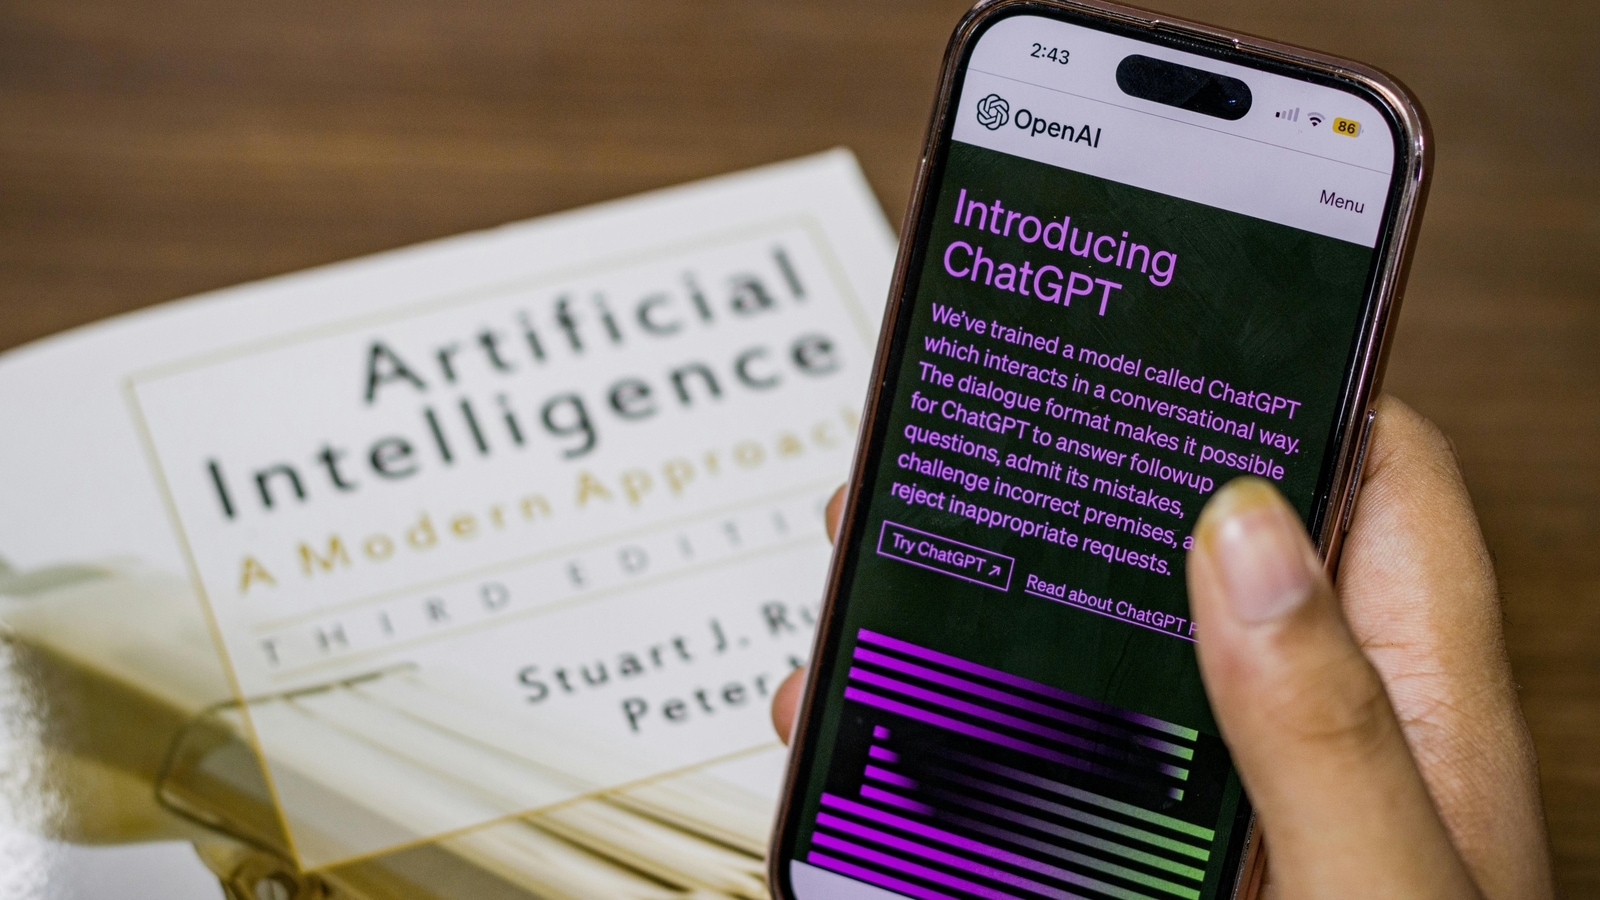 OpenAI provides new Read Aloud attribute to ChatGPT! Know how to use it on smartphones and world wide web